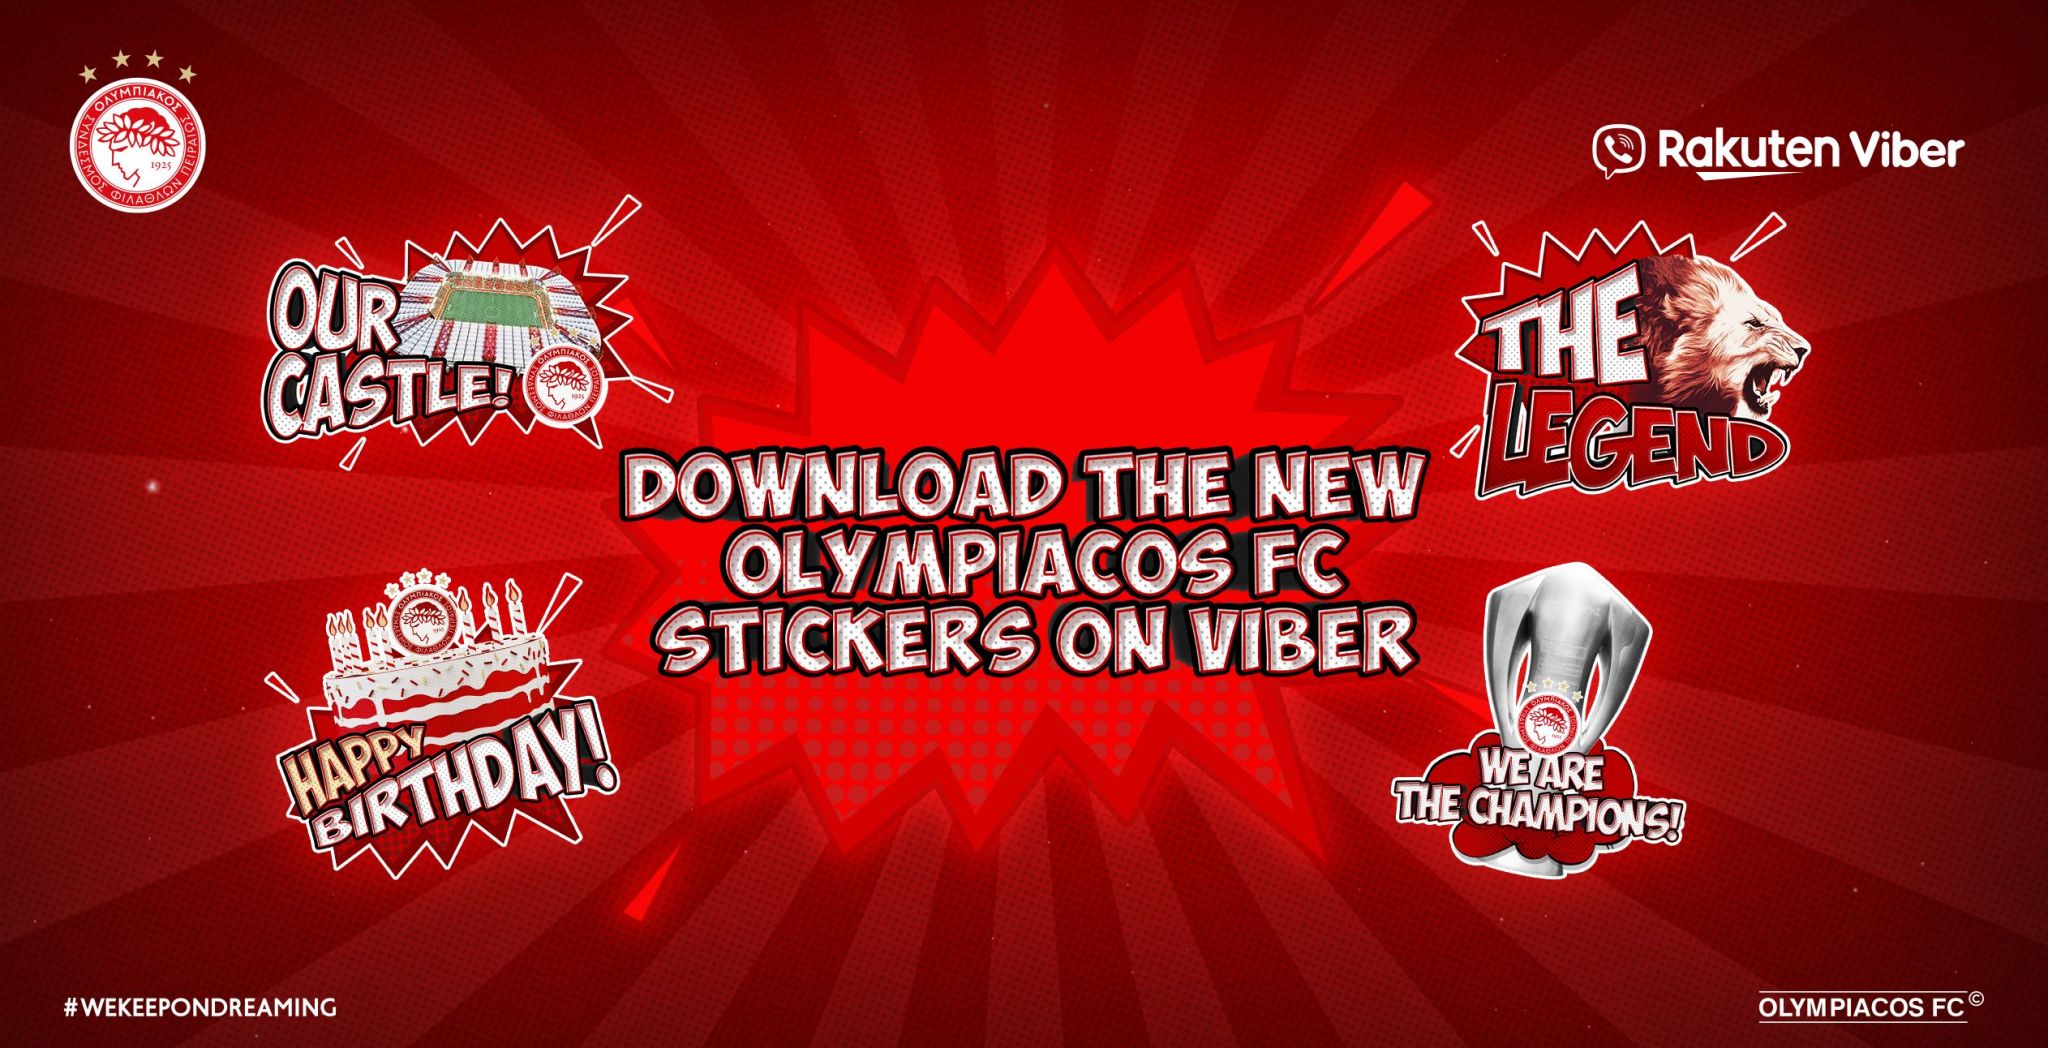 The new stickers of Olympiacos FC have arrived on Viber!